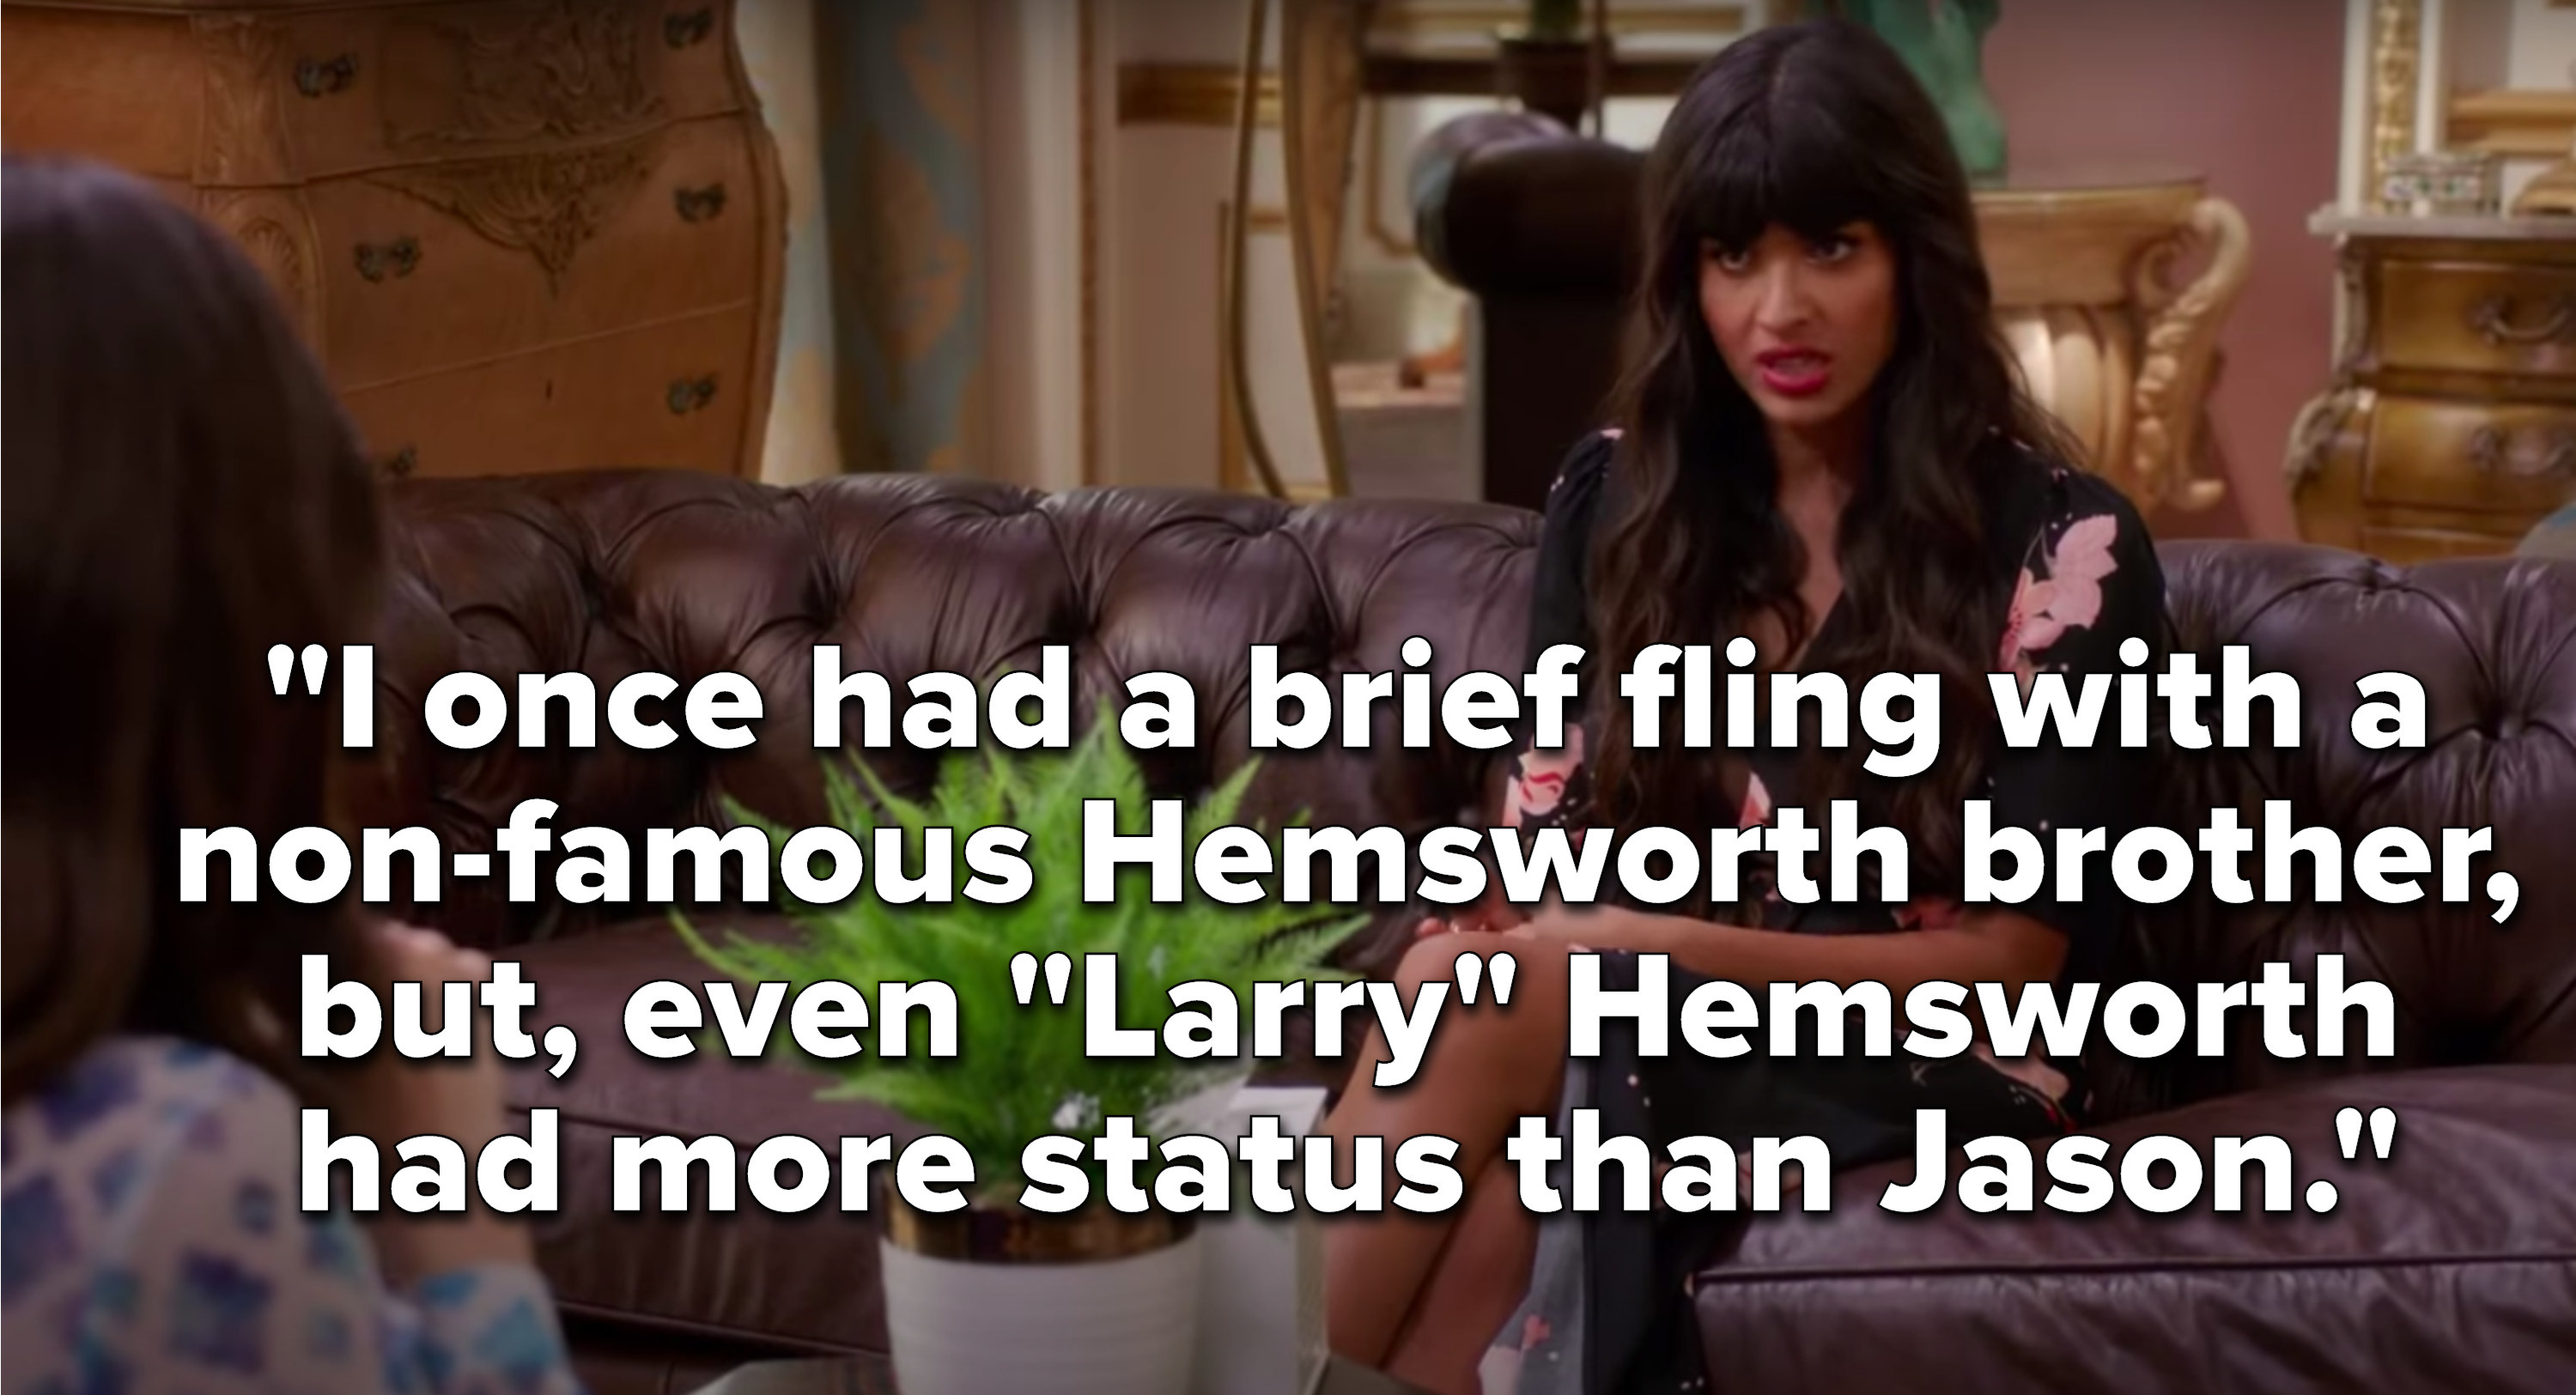 Tahani says, I once had a brief fling with a non-famous Hemsworth brother, but, even Larry Hemsworth had more status than Jason